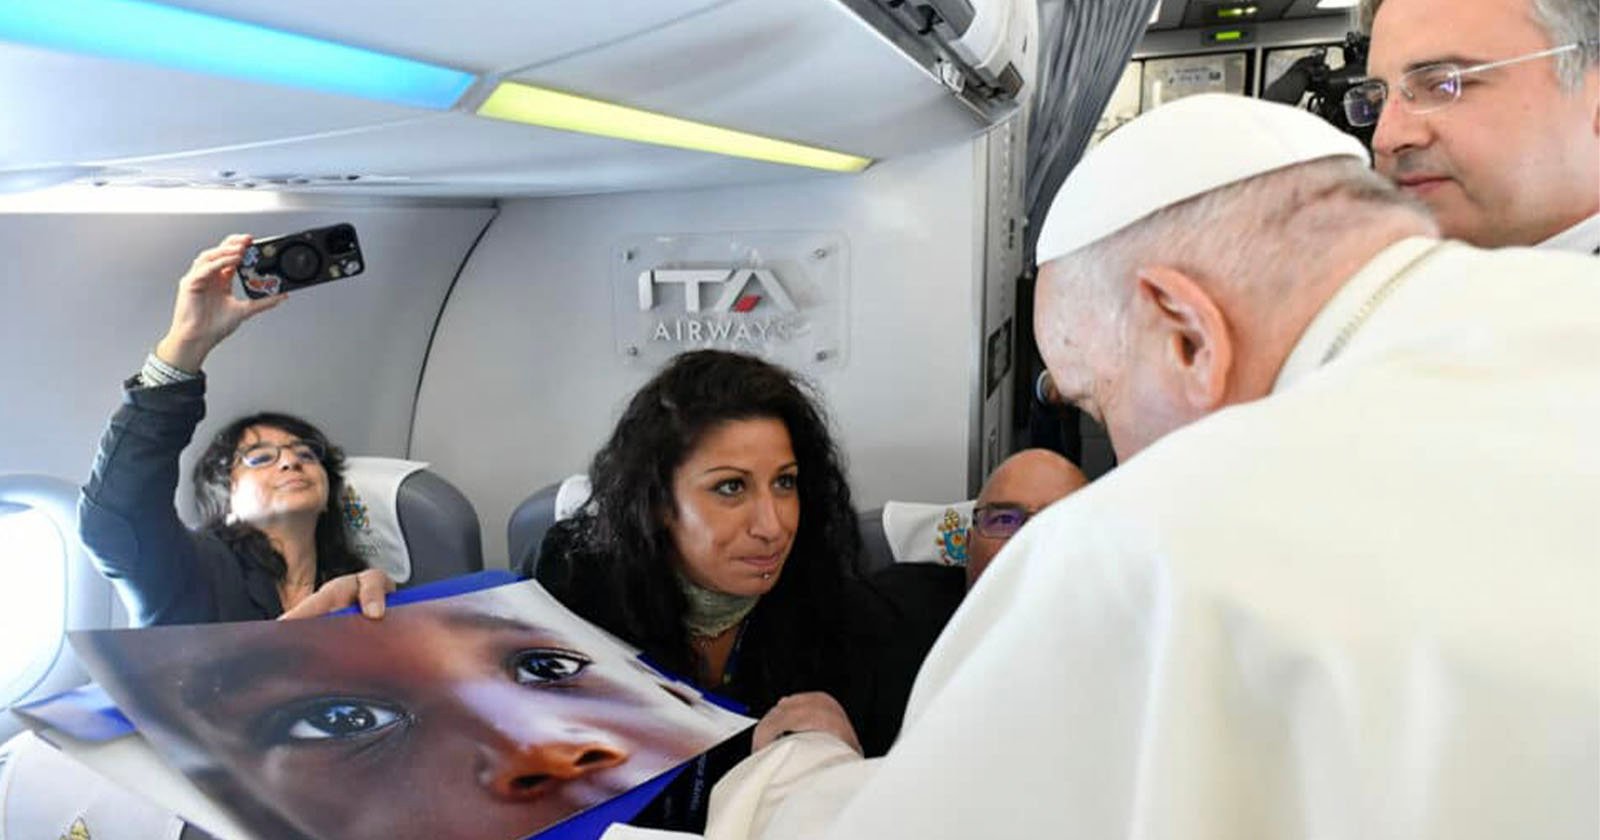  photographer moves pope francis her photo child 